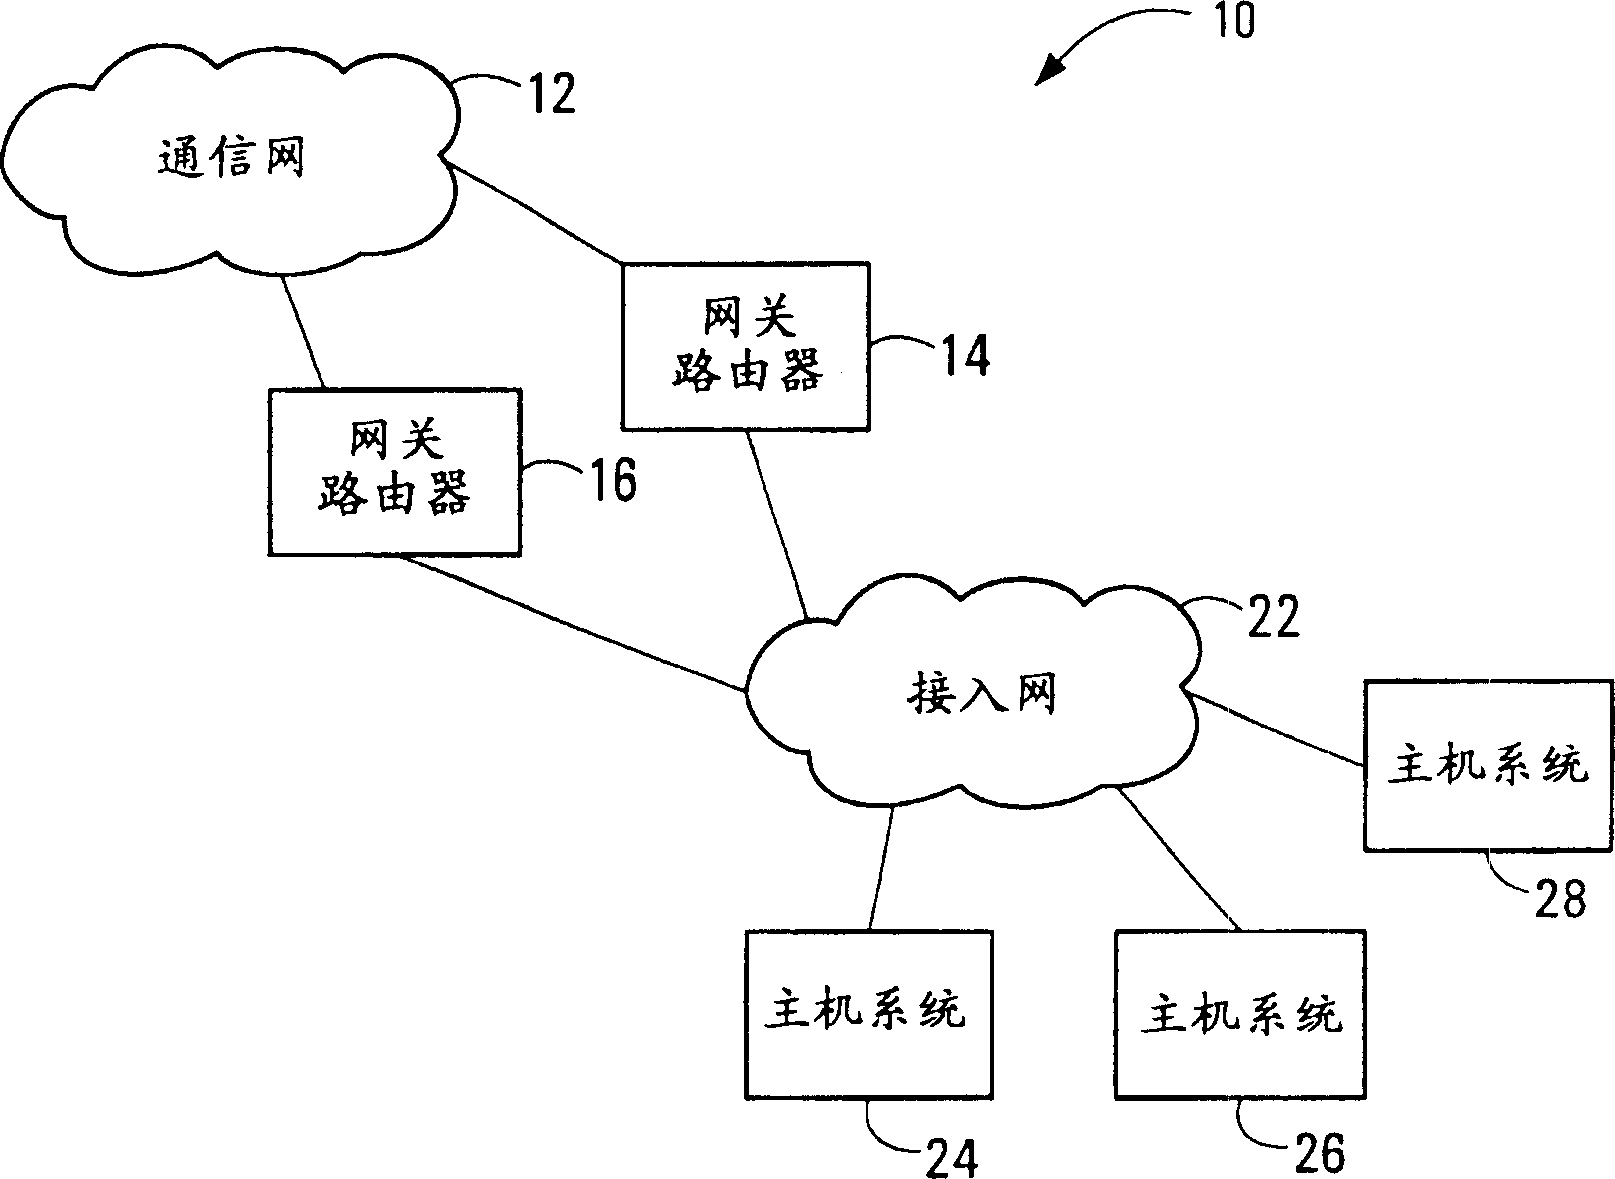 Communication path redundancy protection systems and methods